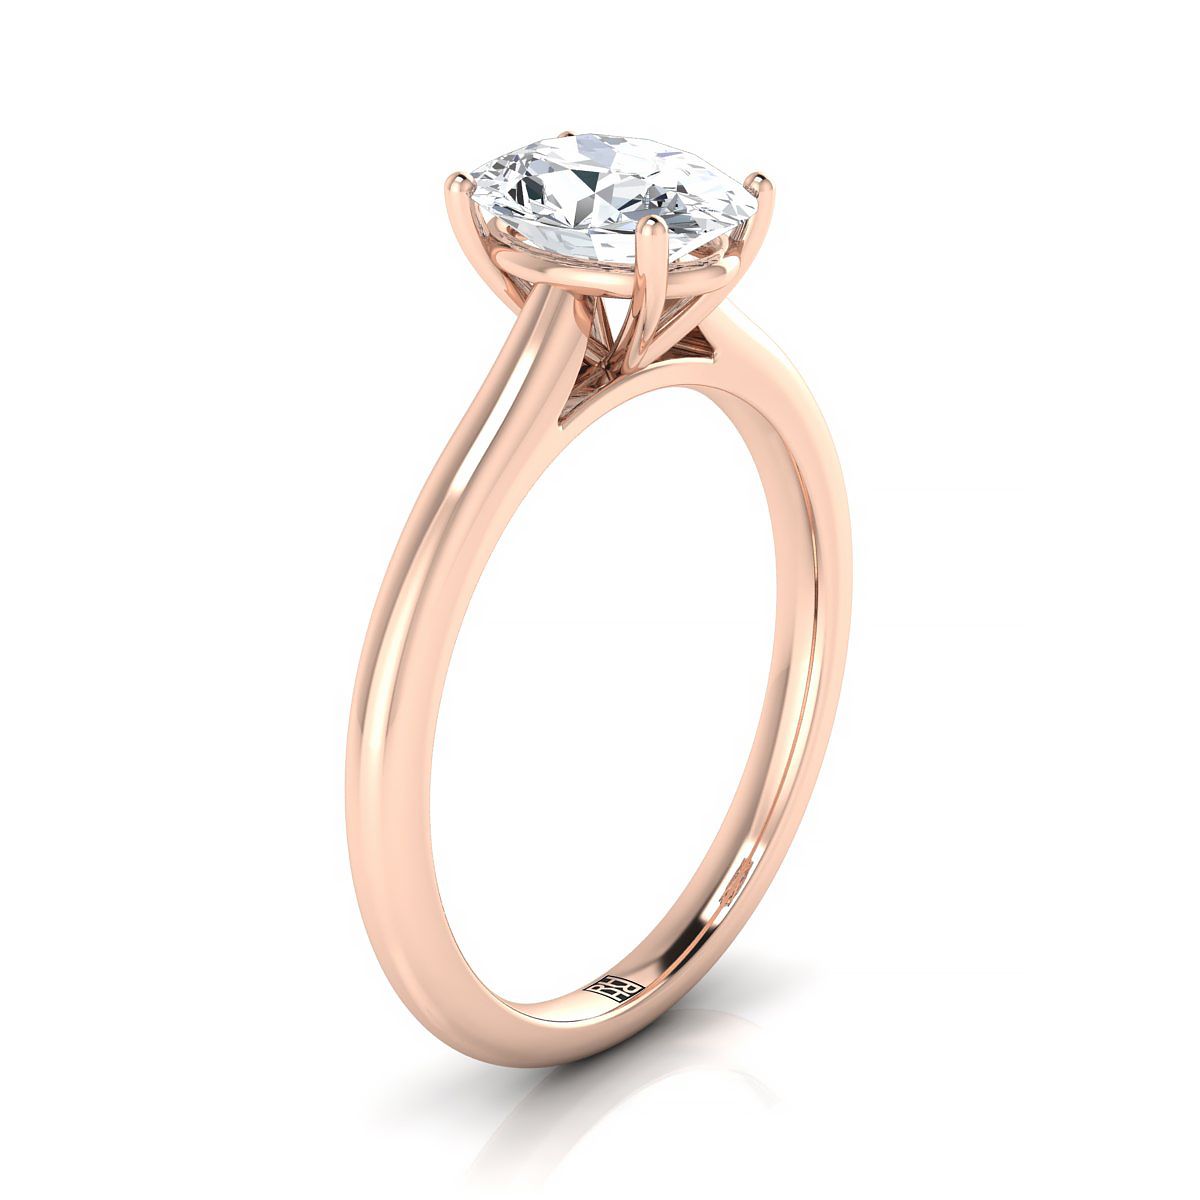 14K Rose Gold Oval Emerald Pinched Comfort Fit Claw Prong Solitaire Engagement Ring